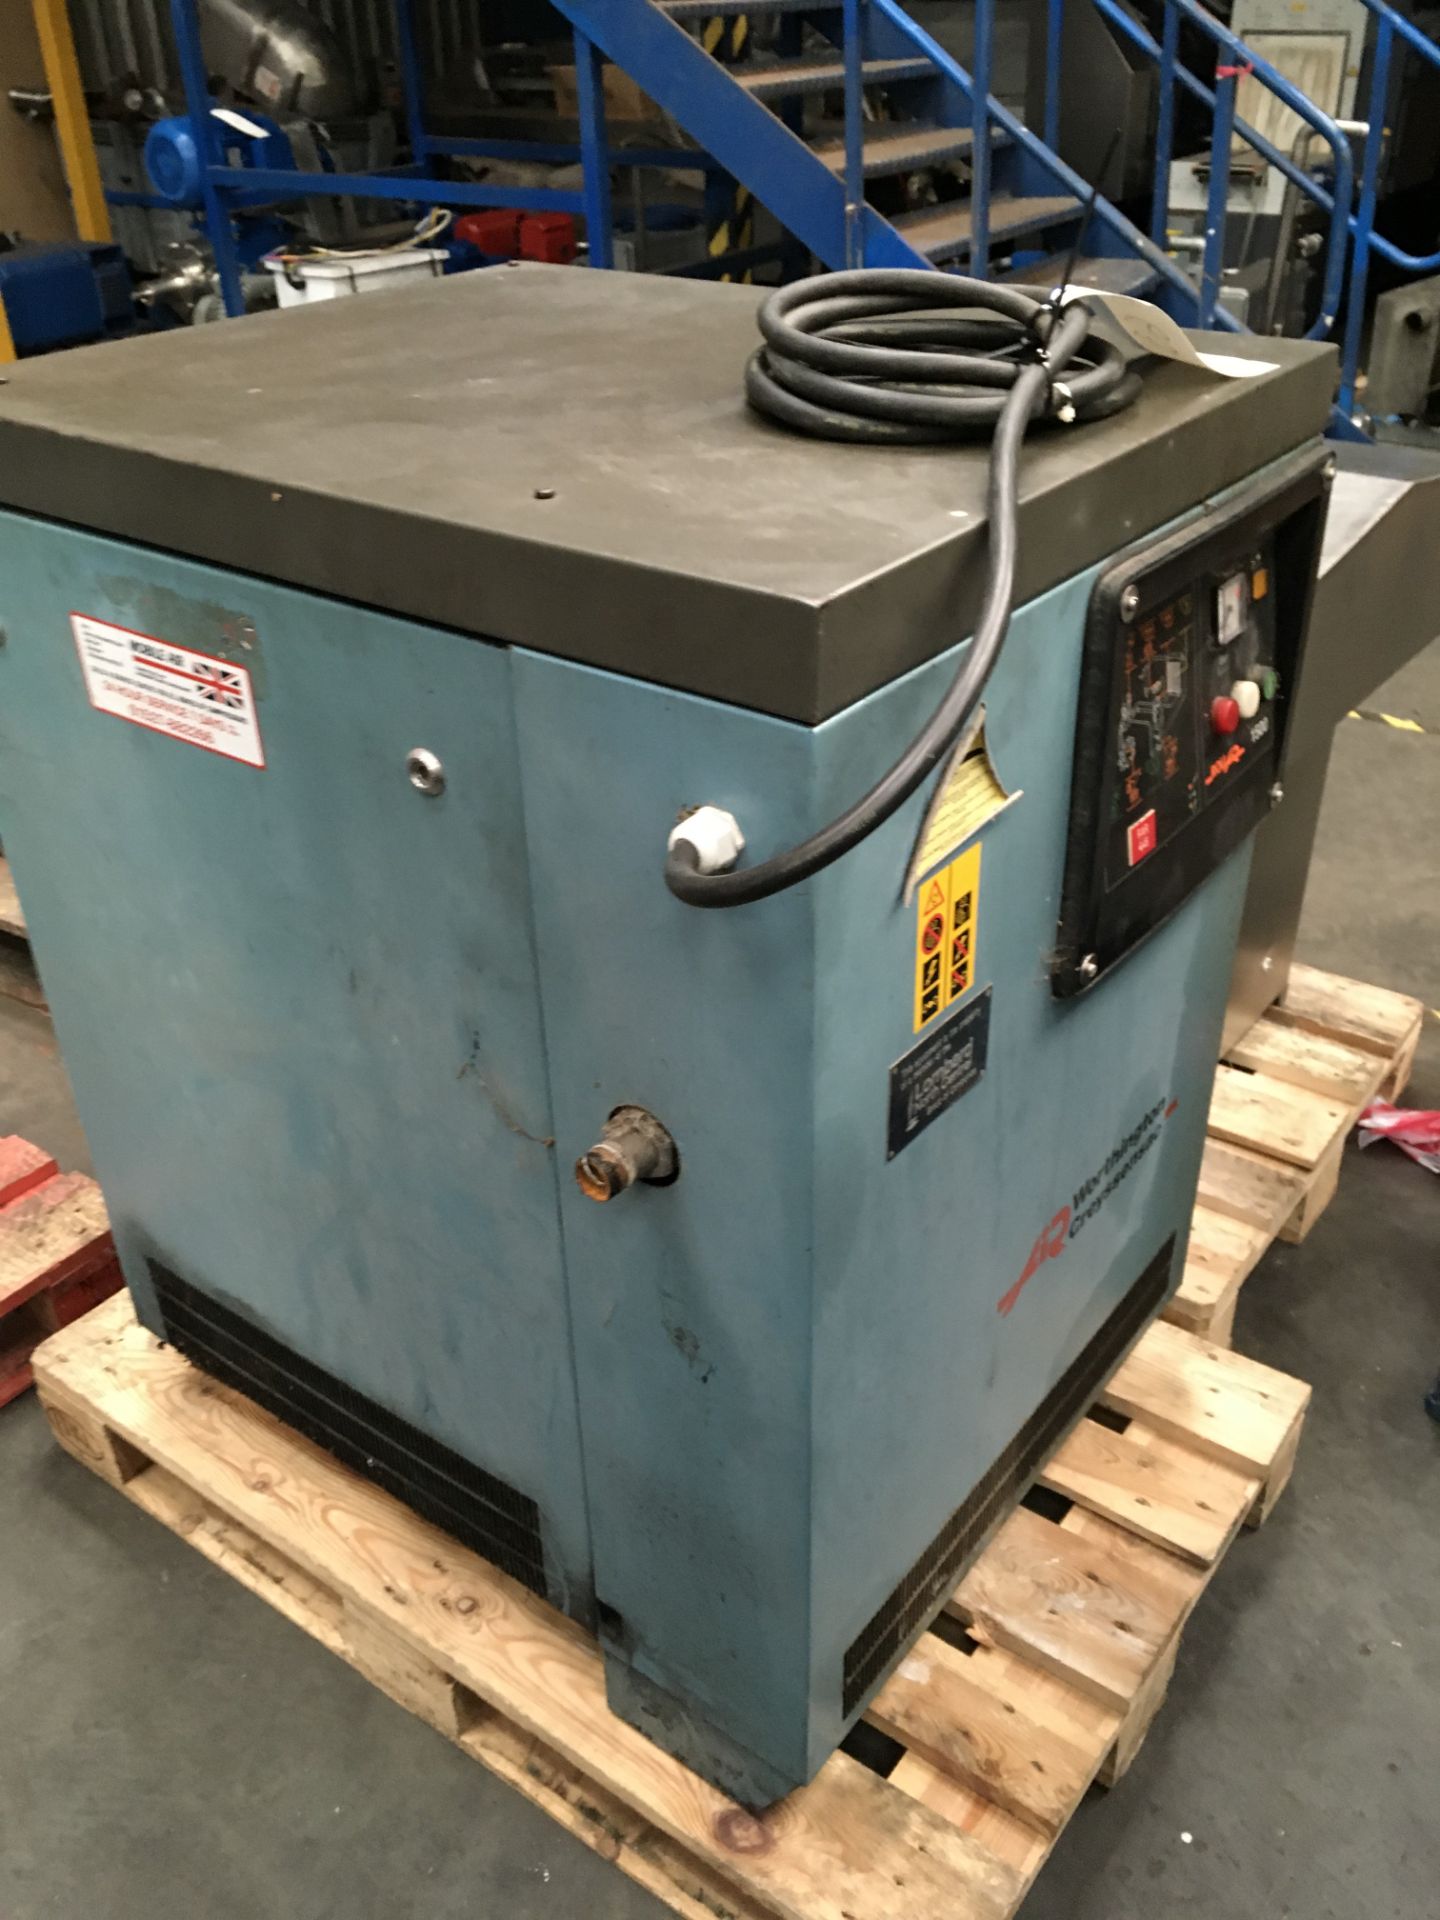 Rollair 1500 Air Compressor, approx. 1000mm long x 800mm wide x 1100mm high, £50 lift out charge - Image 3 of 3